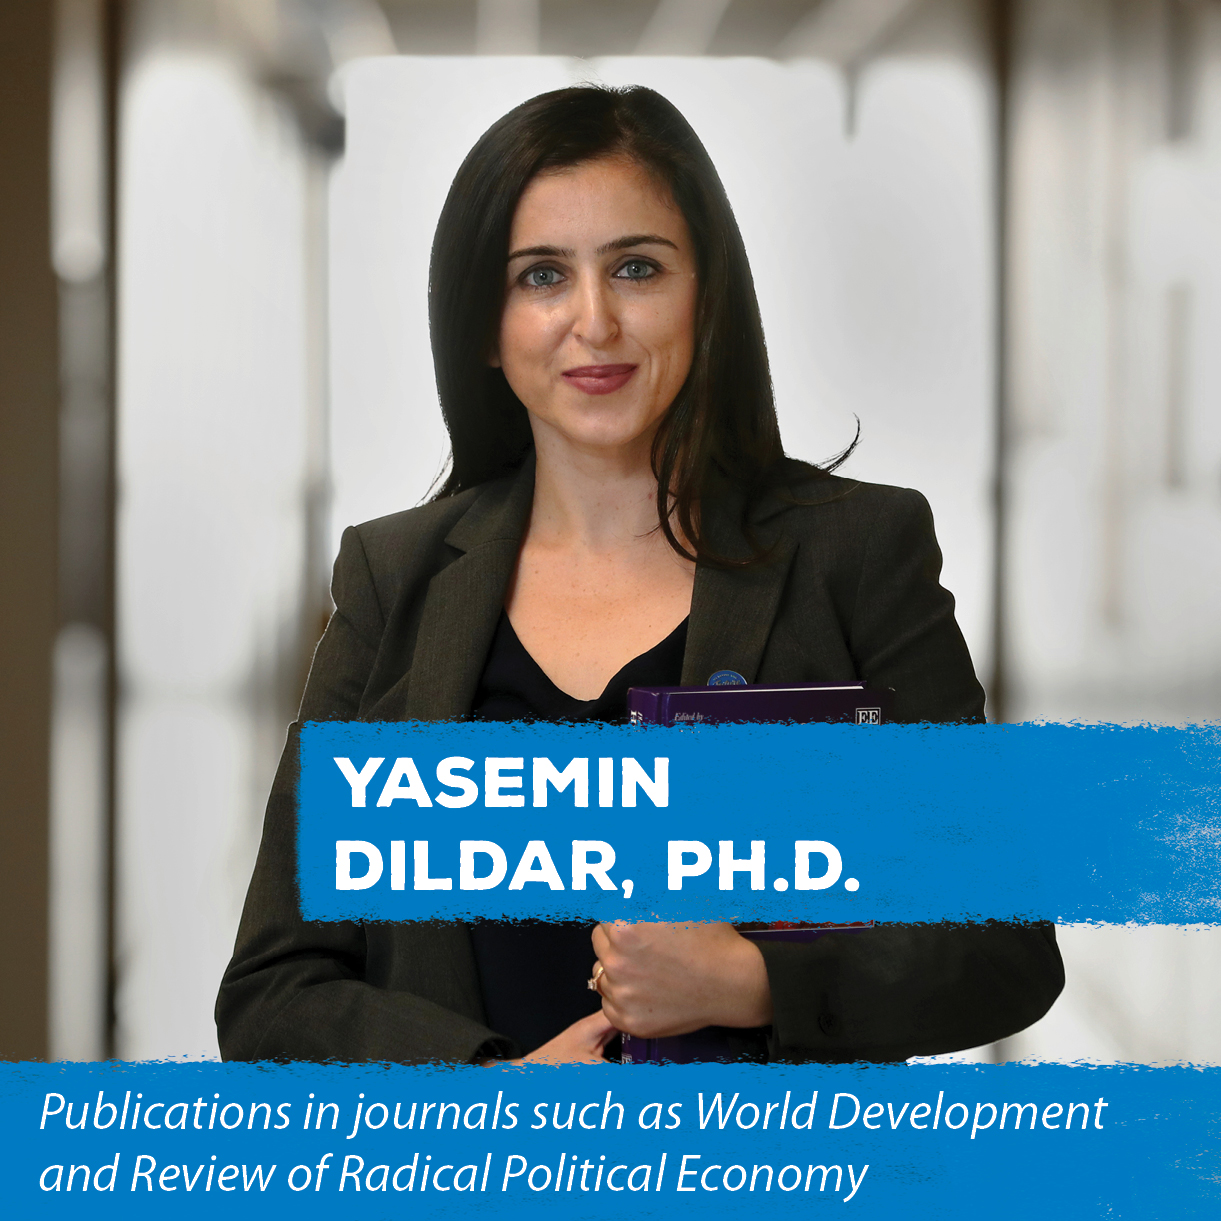 Yasemin Dildar, Ph.D. - Publications in journals such as World Development and Review of Radical Political Economy